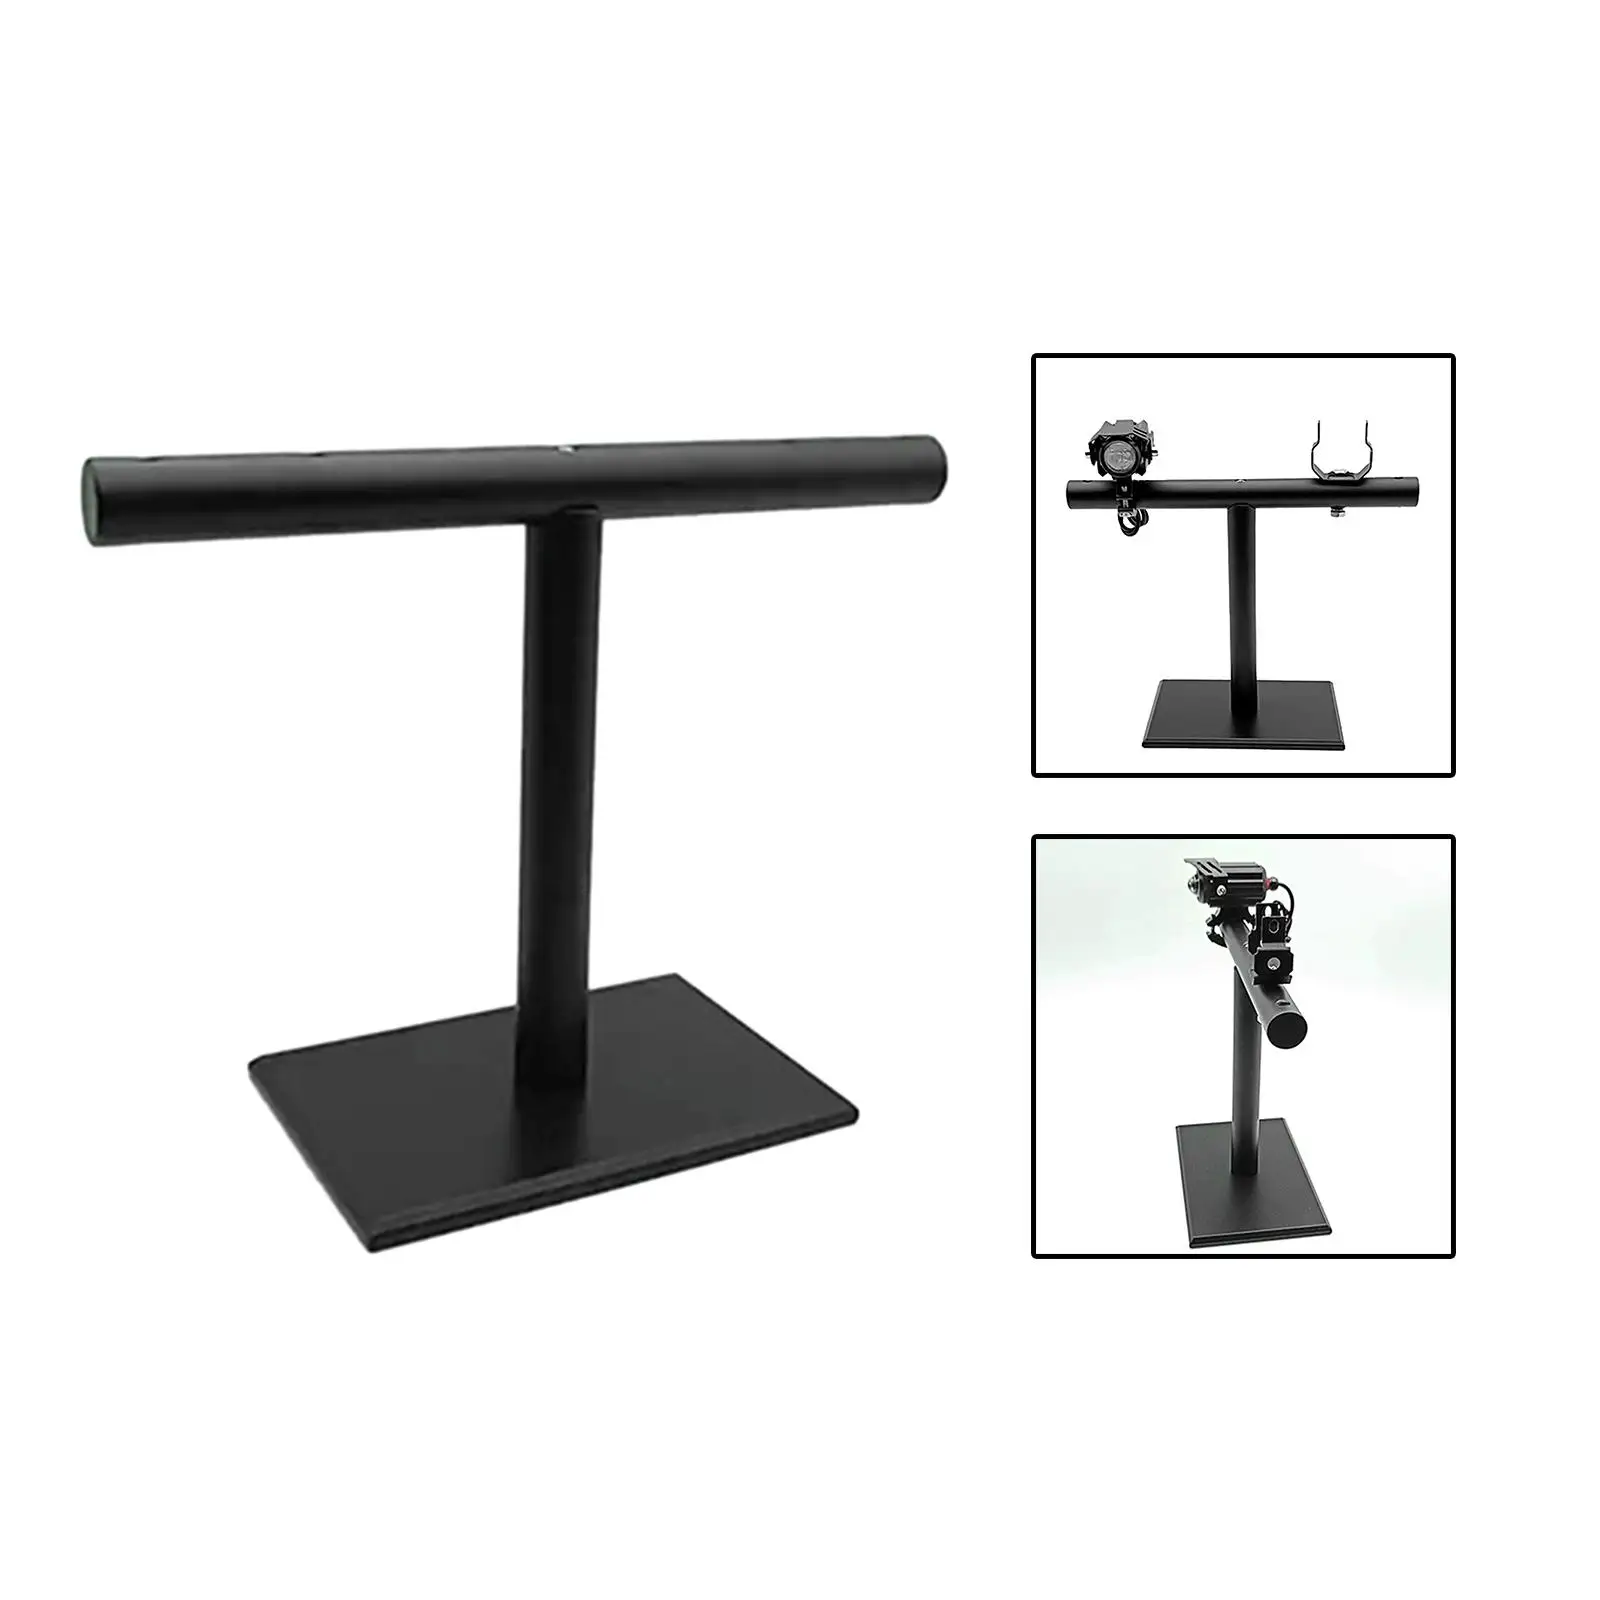 Auto Light Display Stand T Shaped Metal Stand Holder Headset Display Stand Holder Storage Bracket Motorcycle Lights Display Bar